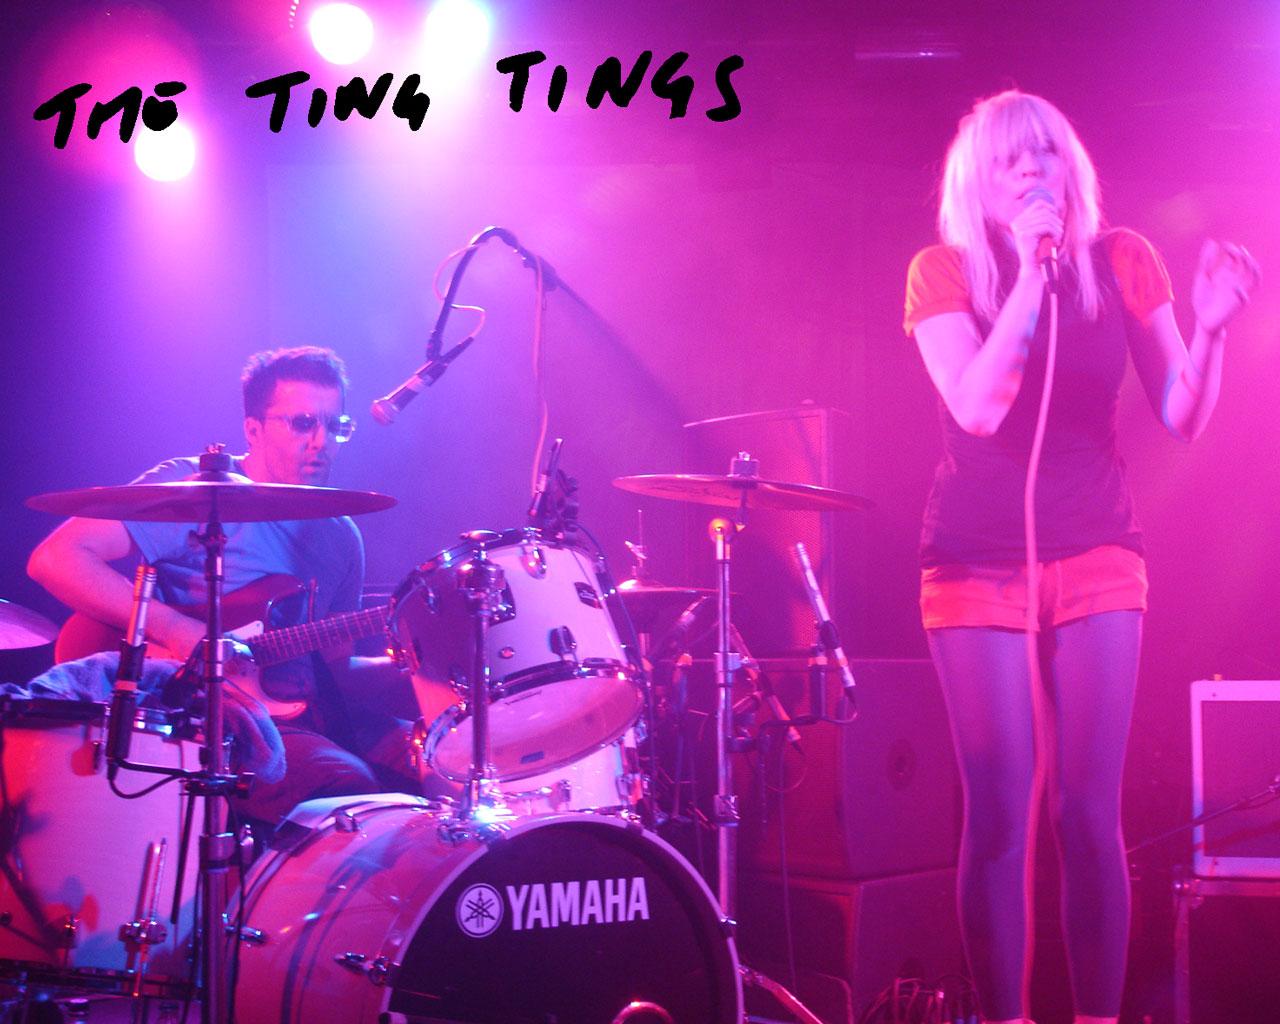 The Ting Tings Wallpaper #3 1280 x 1024 